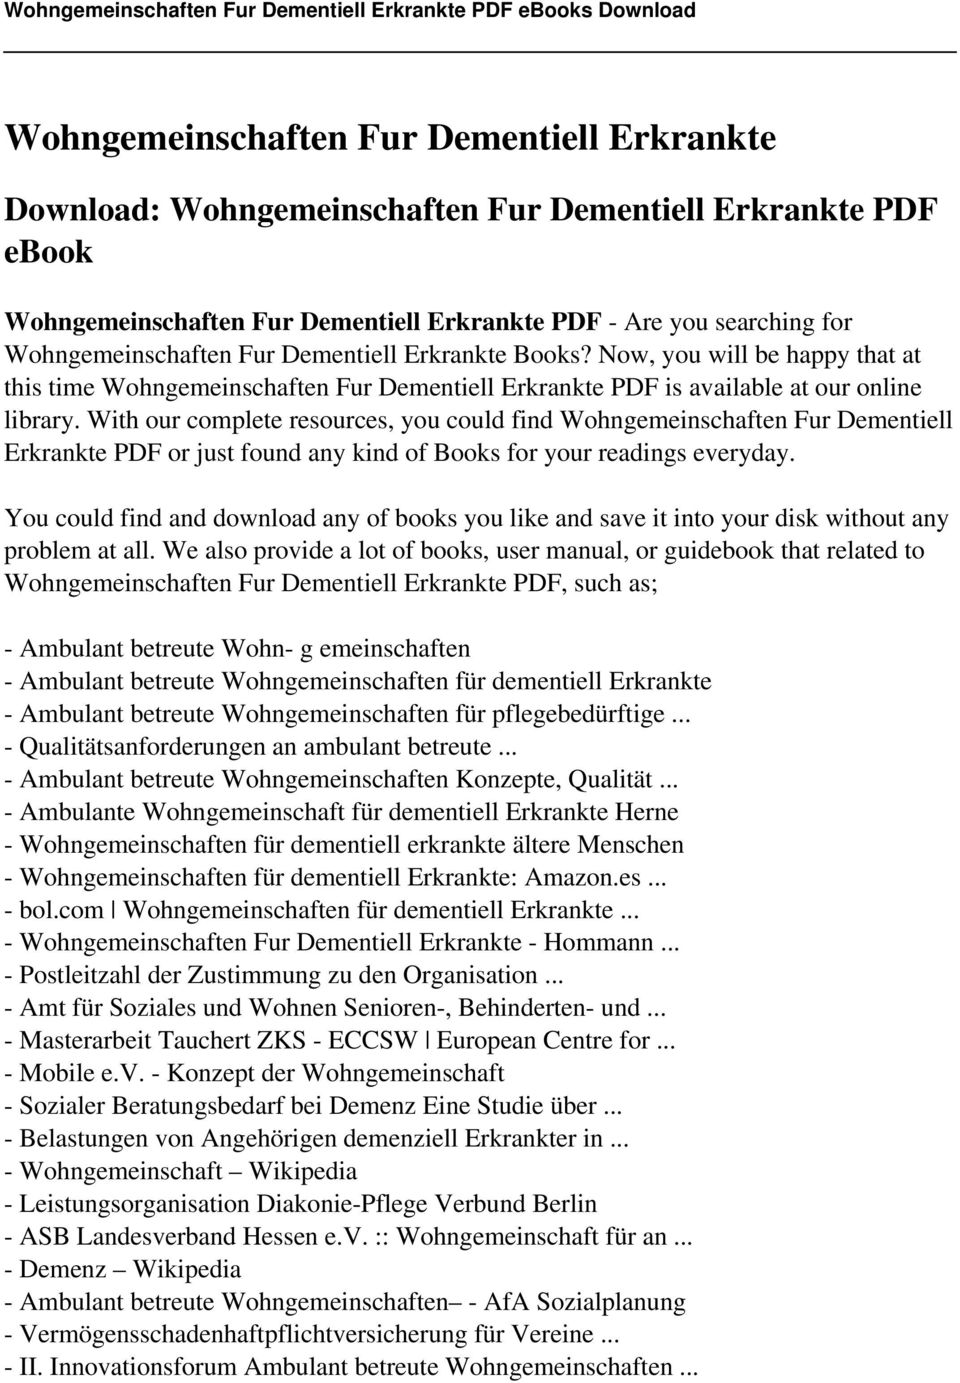 With our complete resources, you could find Wohngemeinschaften Fur Dementiell Erkrankte PDF or just found any kind of Books for your readings everyday.